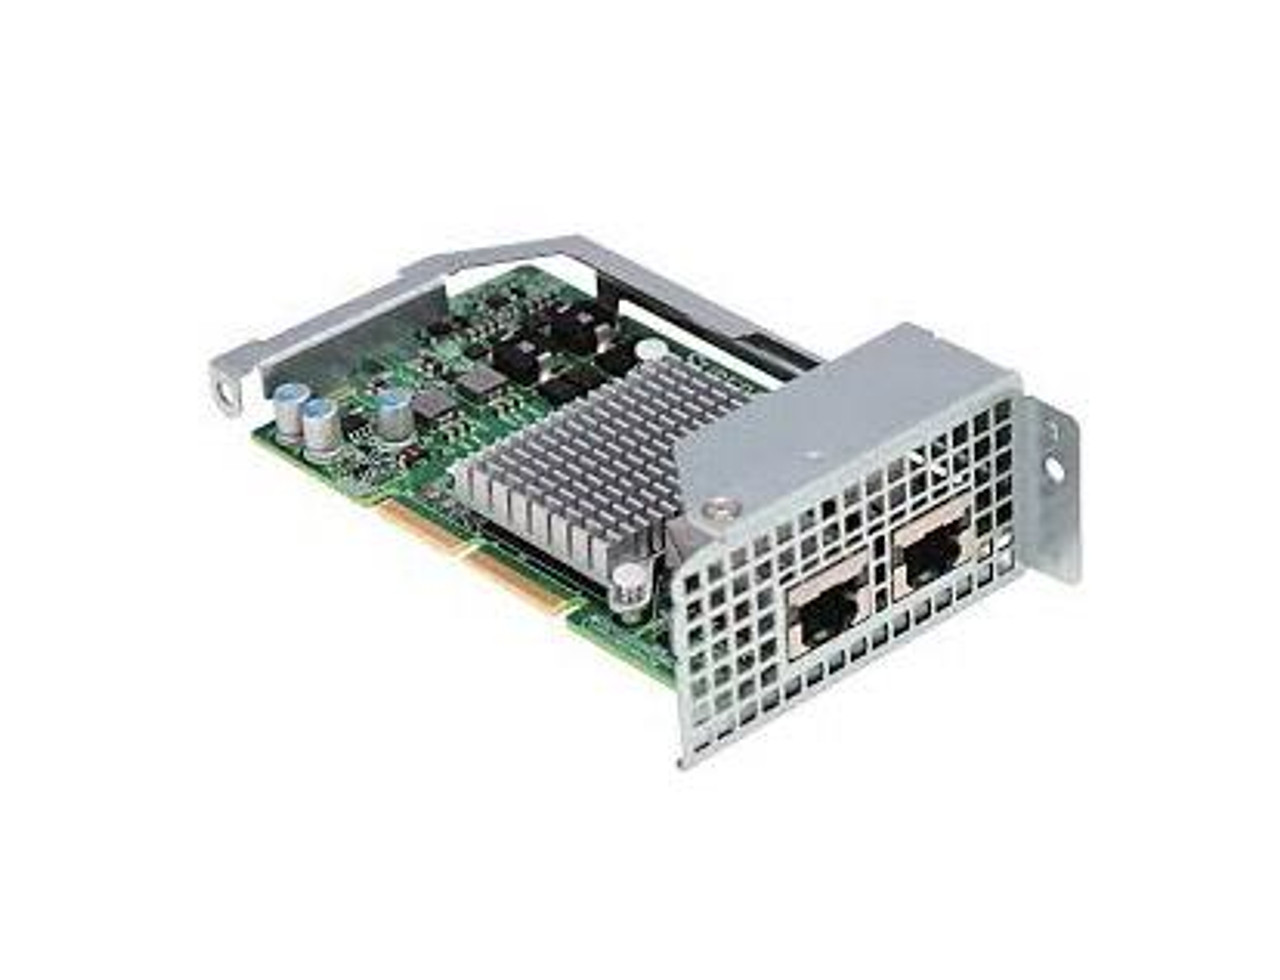 AOC-CTG-I2S SuperMicro (2x SFP+ Ports and 2x USB 2.0 Ports) 10Gbps PCI Express 2.0 Gigabit Ethernet Network Adapter